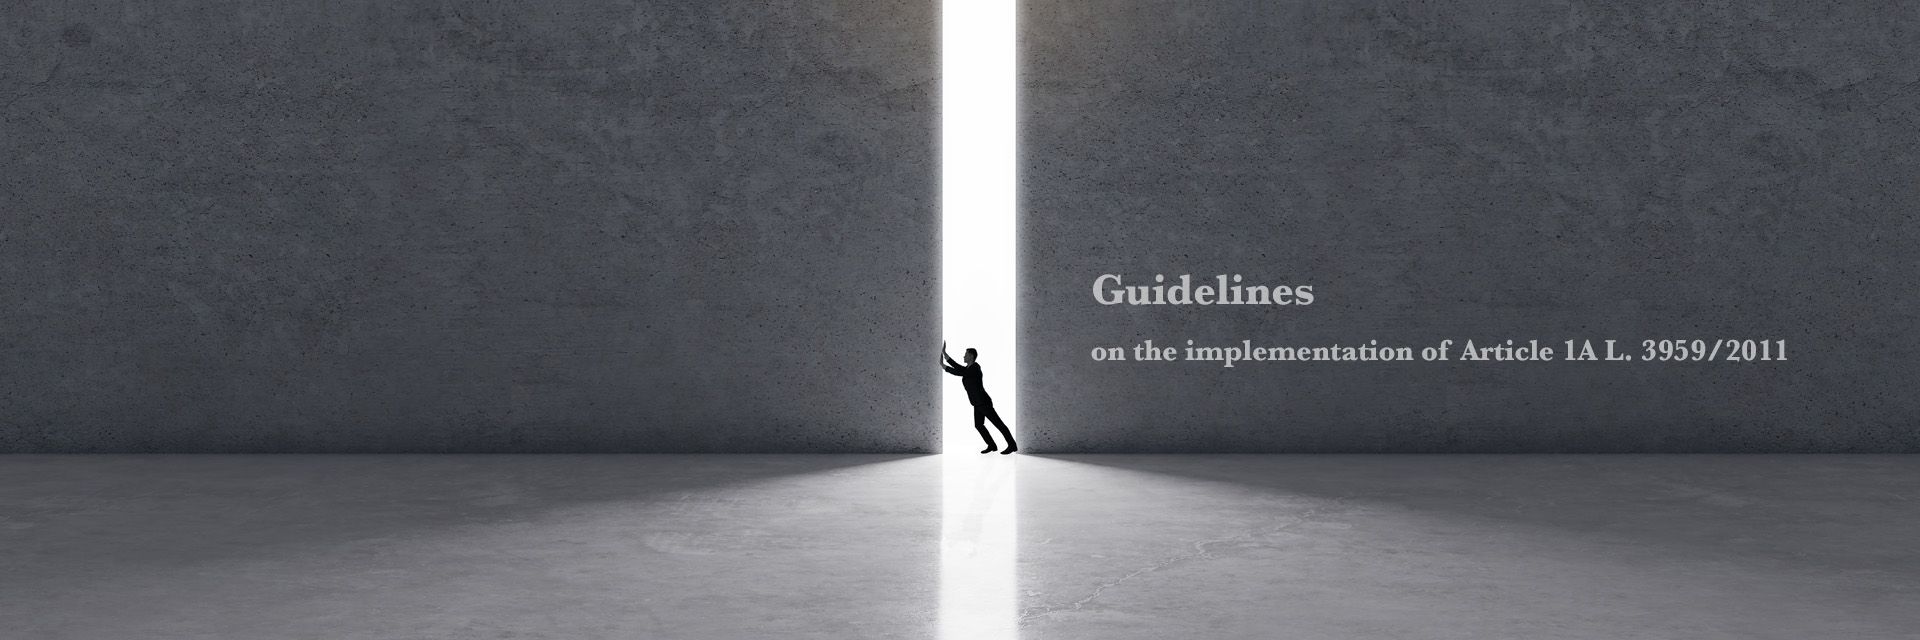 Guidelines on the implementation of Article 1A